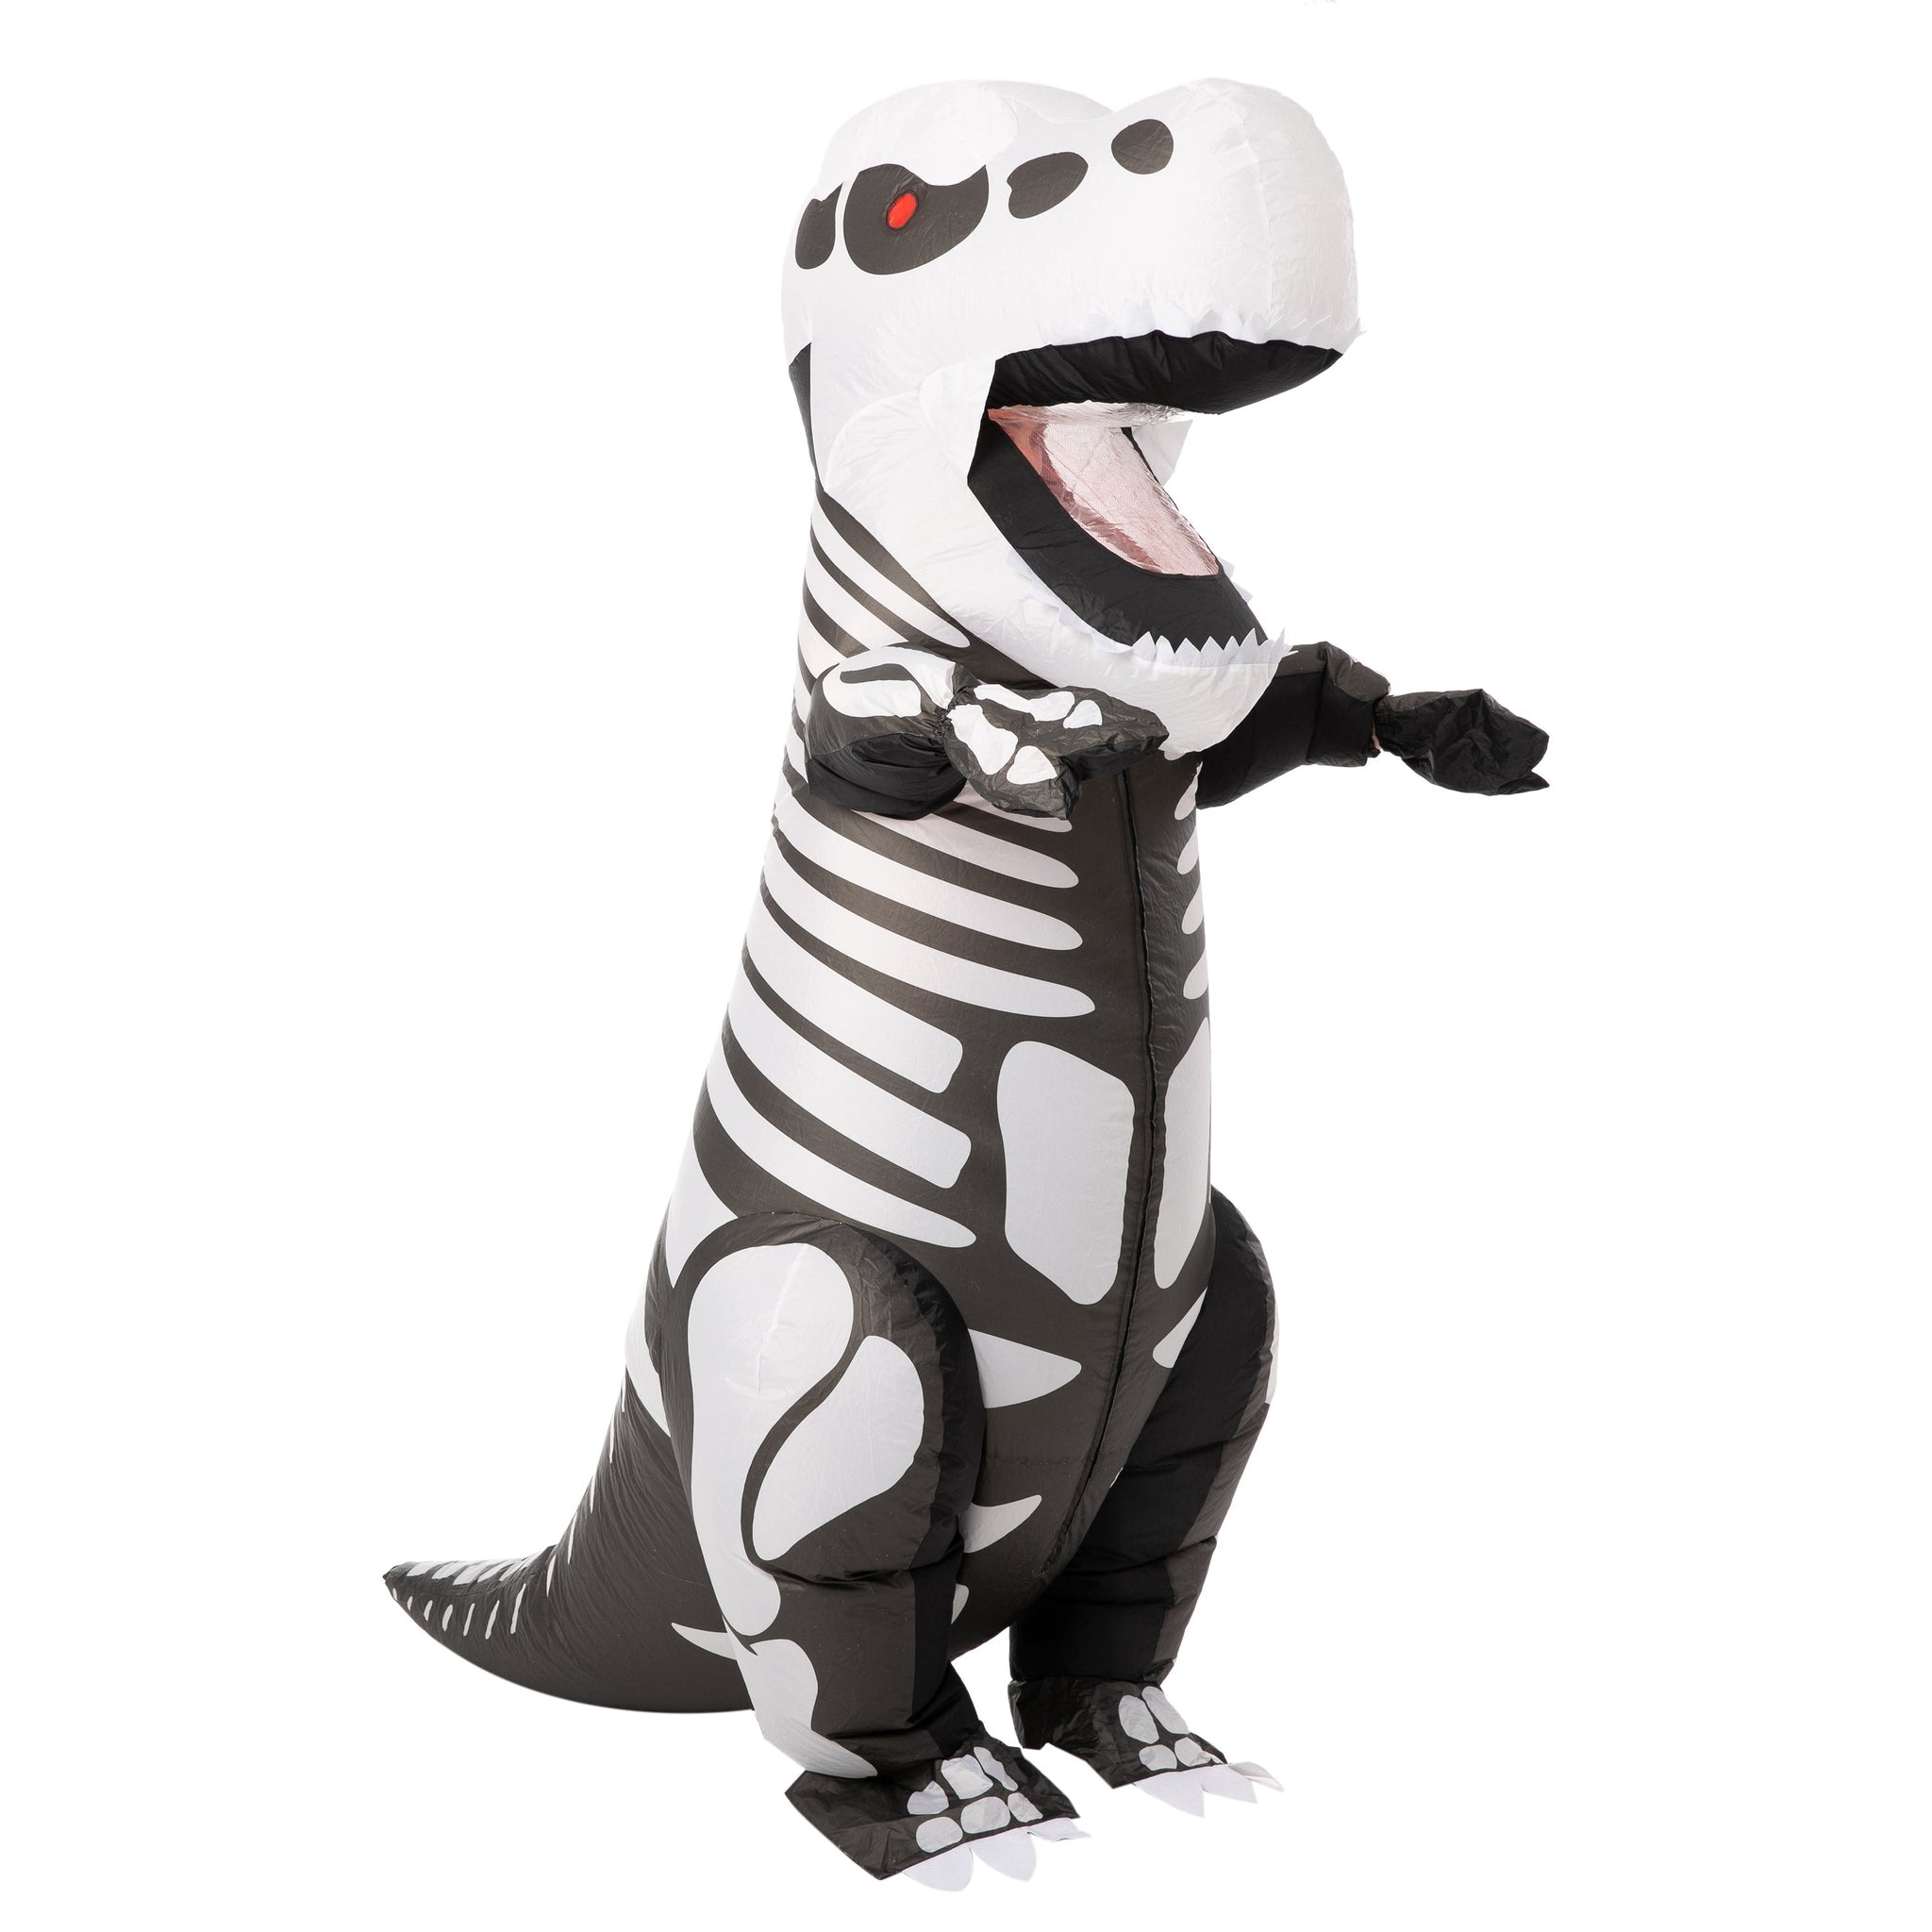 Giant T-Rex Skeleton Inflatable Costume